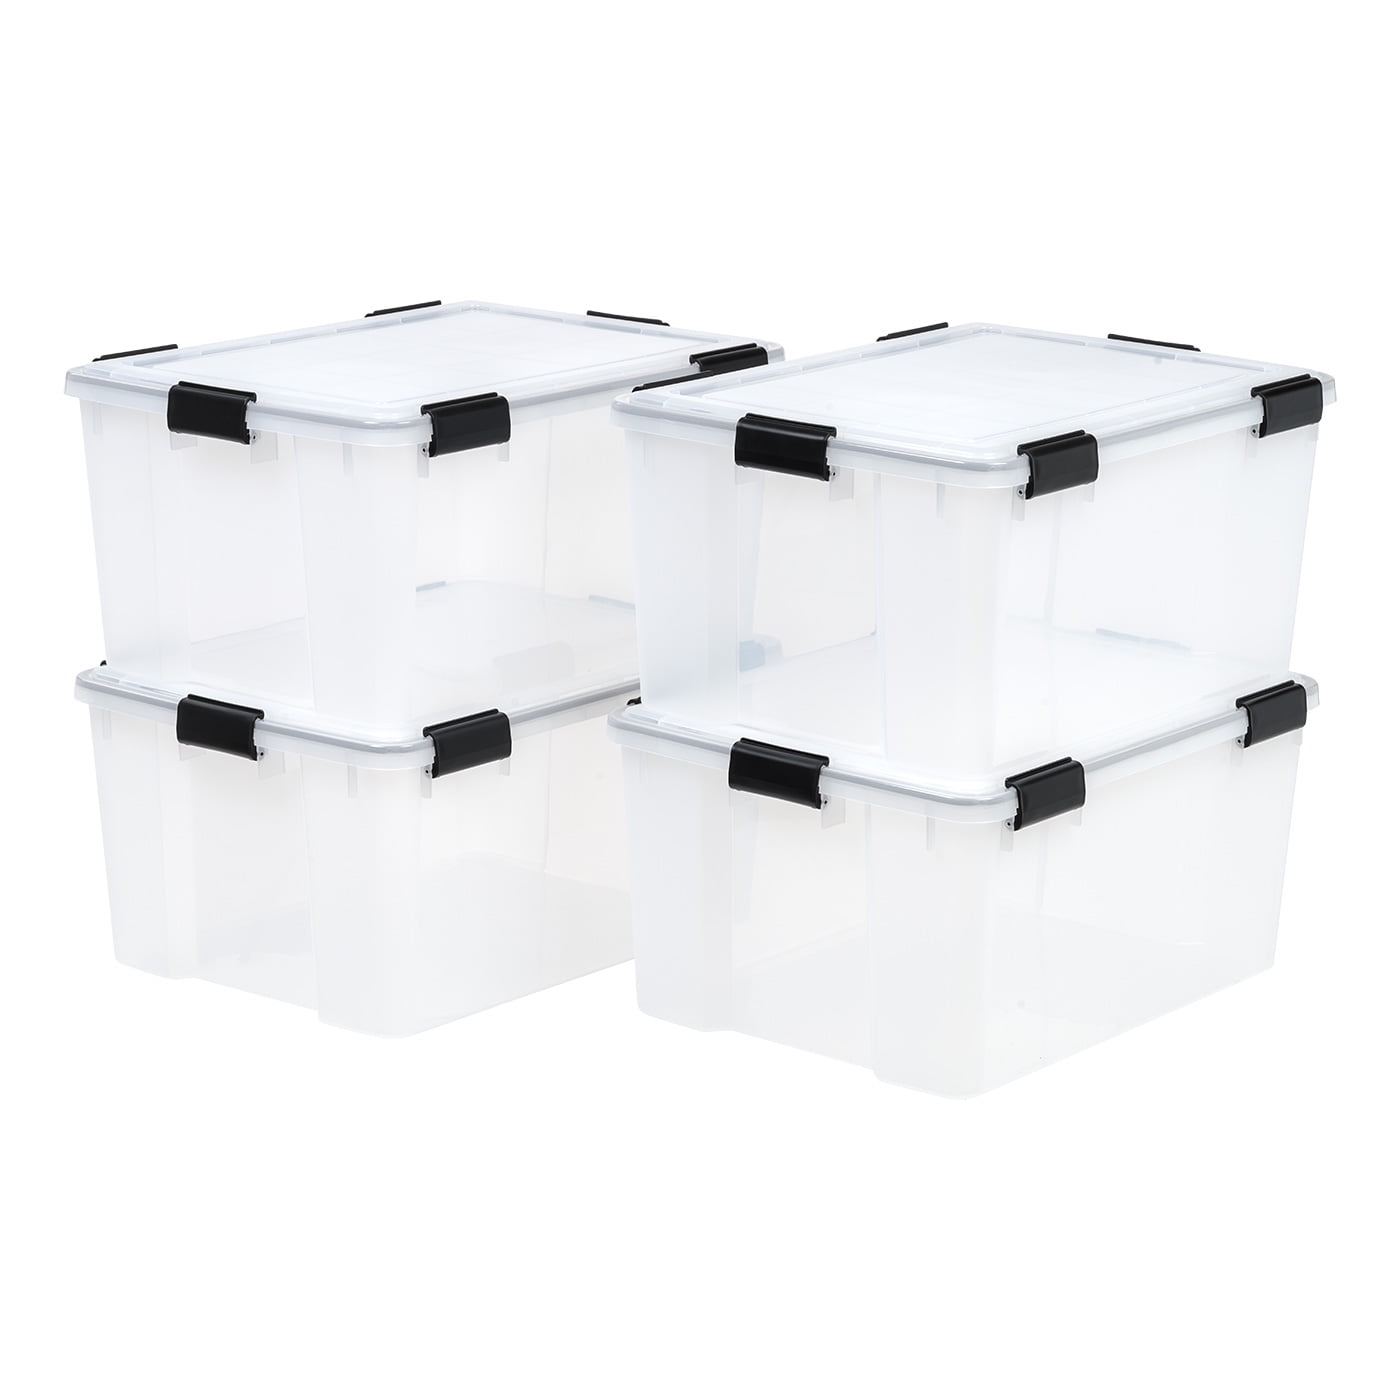 Iris USA 3 Pack 30 Quart Weatherpro Plastic Storage Box Durable Lid and Seal and Secure Latching Buckles